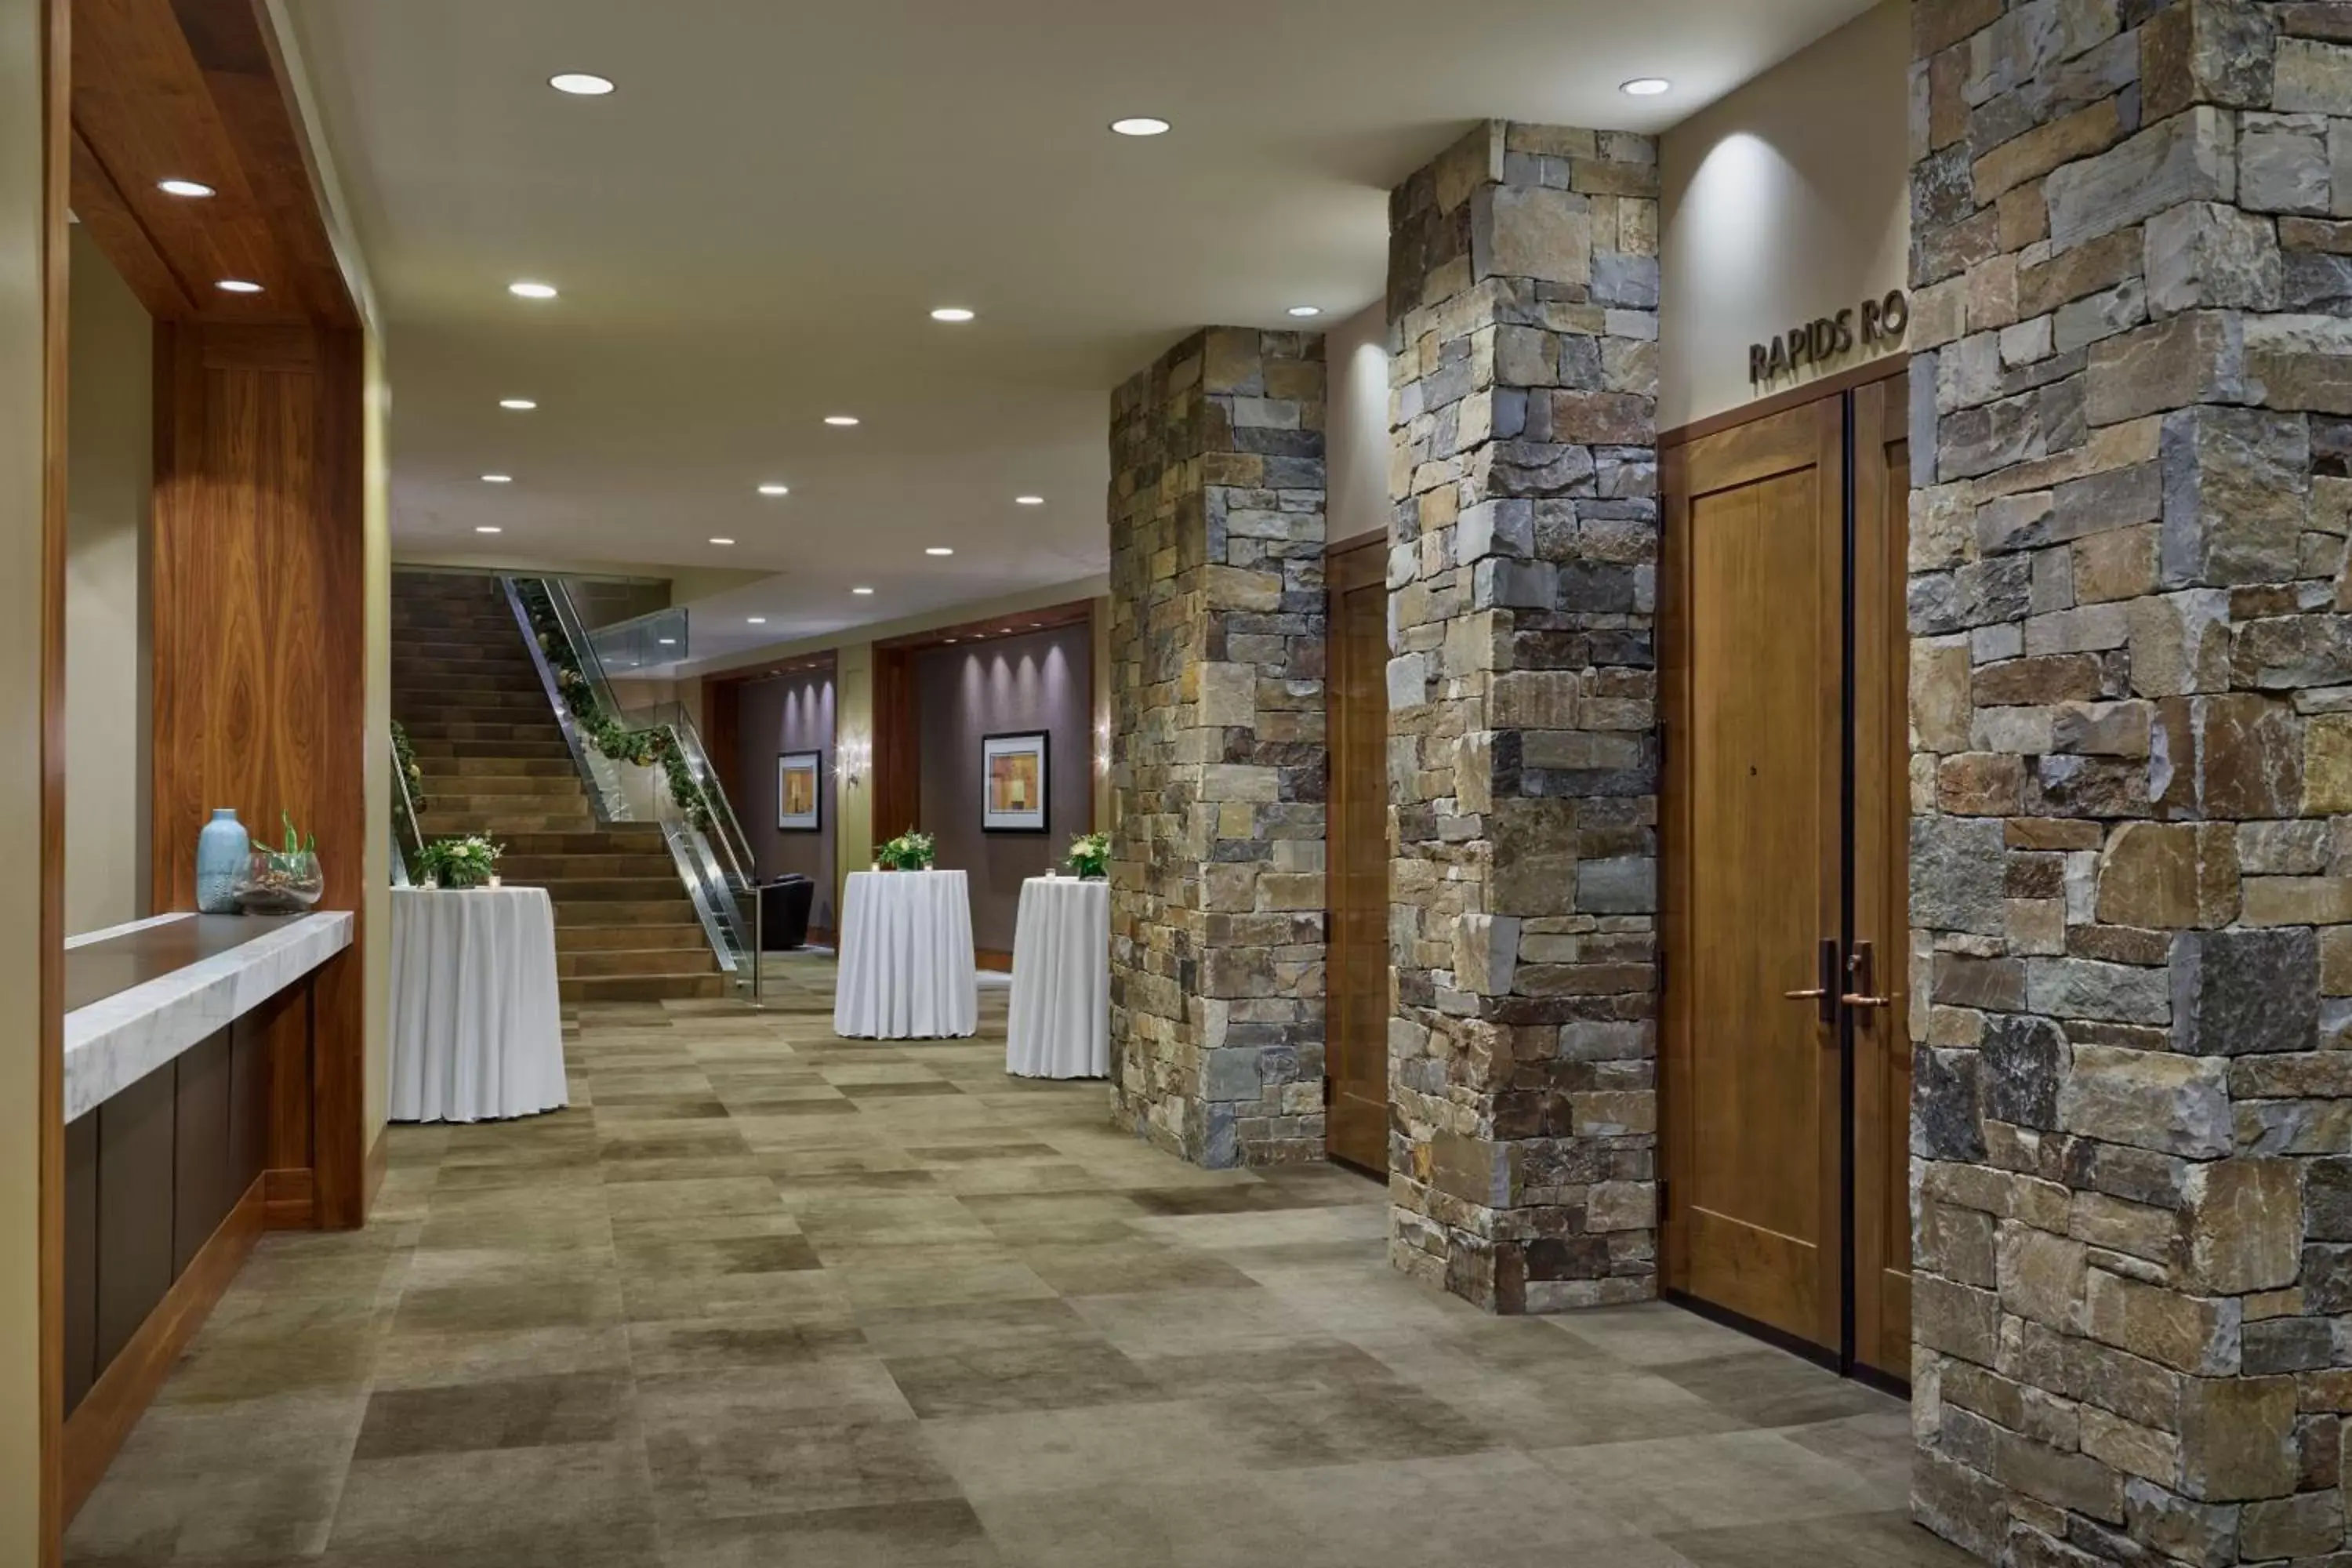 Meeting/conference room, Banquet Facilities in The Westin Riverfront Resort & Spa, Avon, Vail Valley